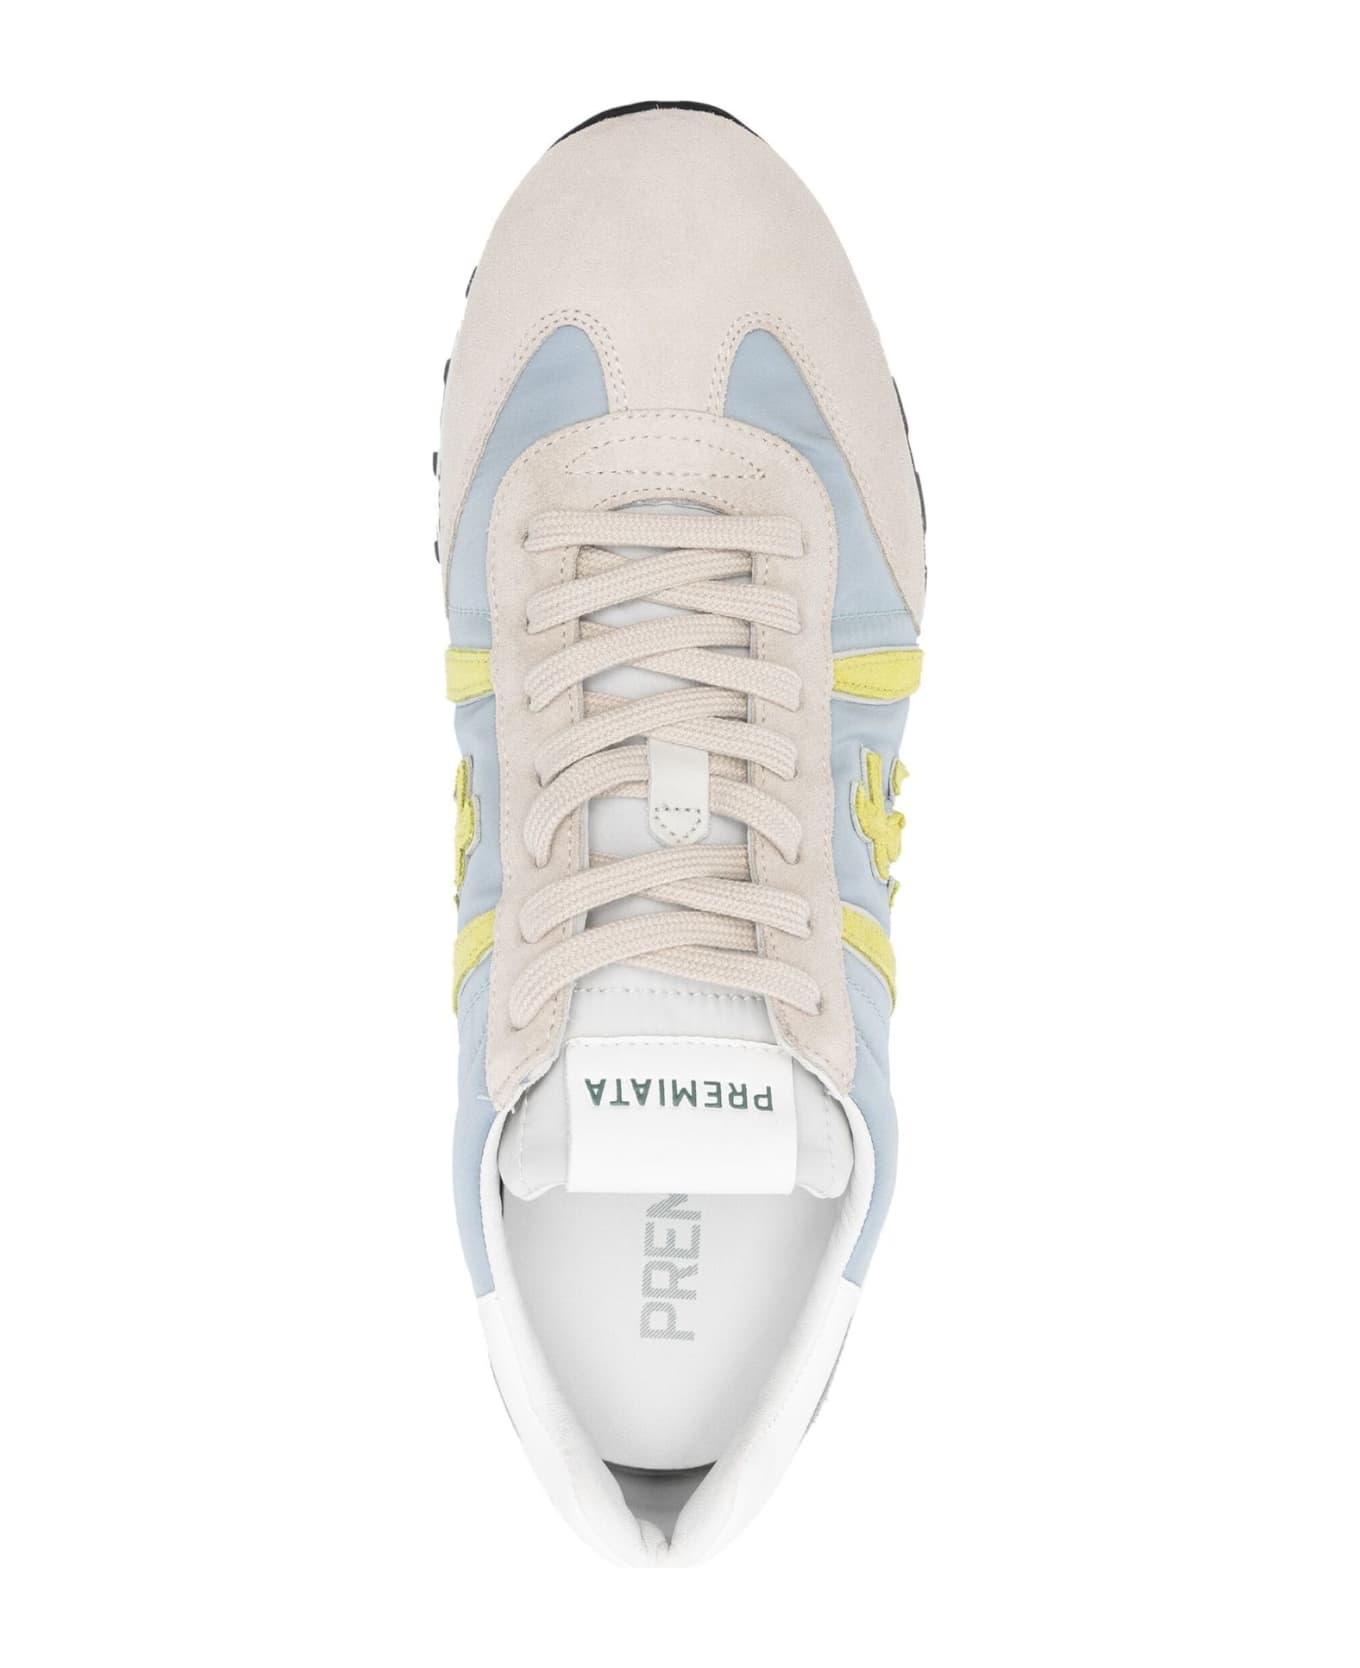 Premiata Lucy 6619 Beige And Blue Sneakers - Beige スニーカー